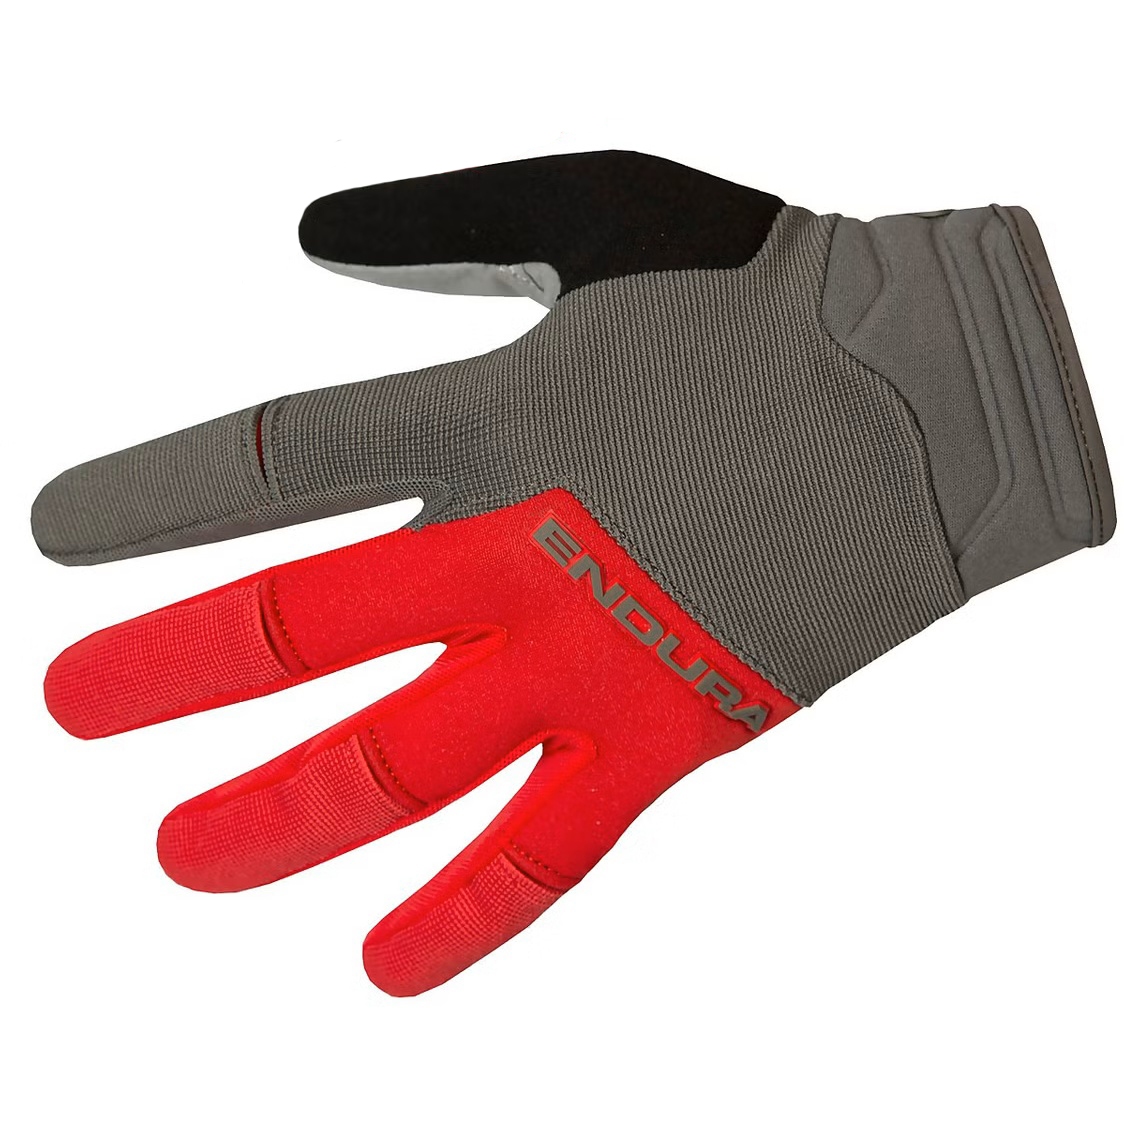 Picture of Endura Hummvee Plus II Gloves - red